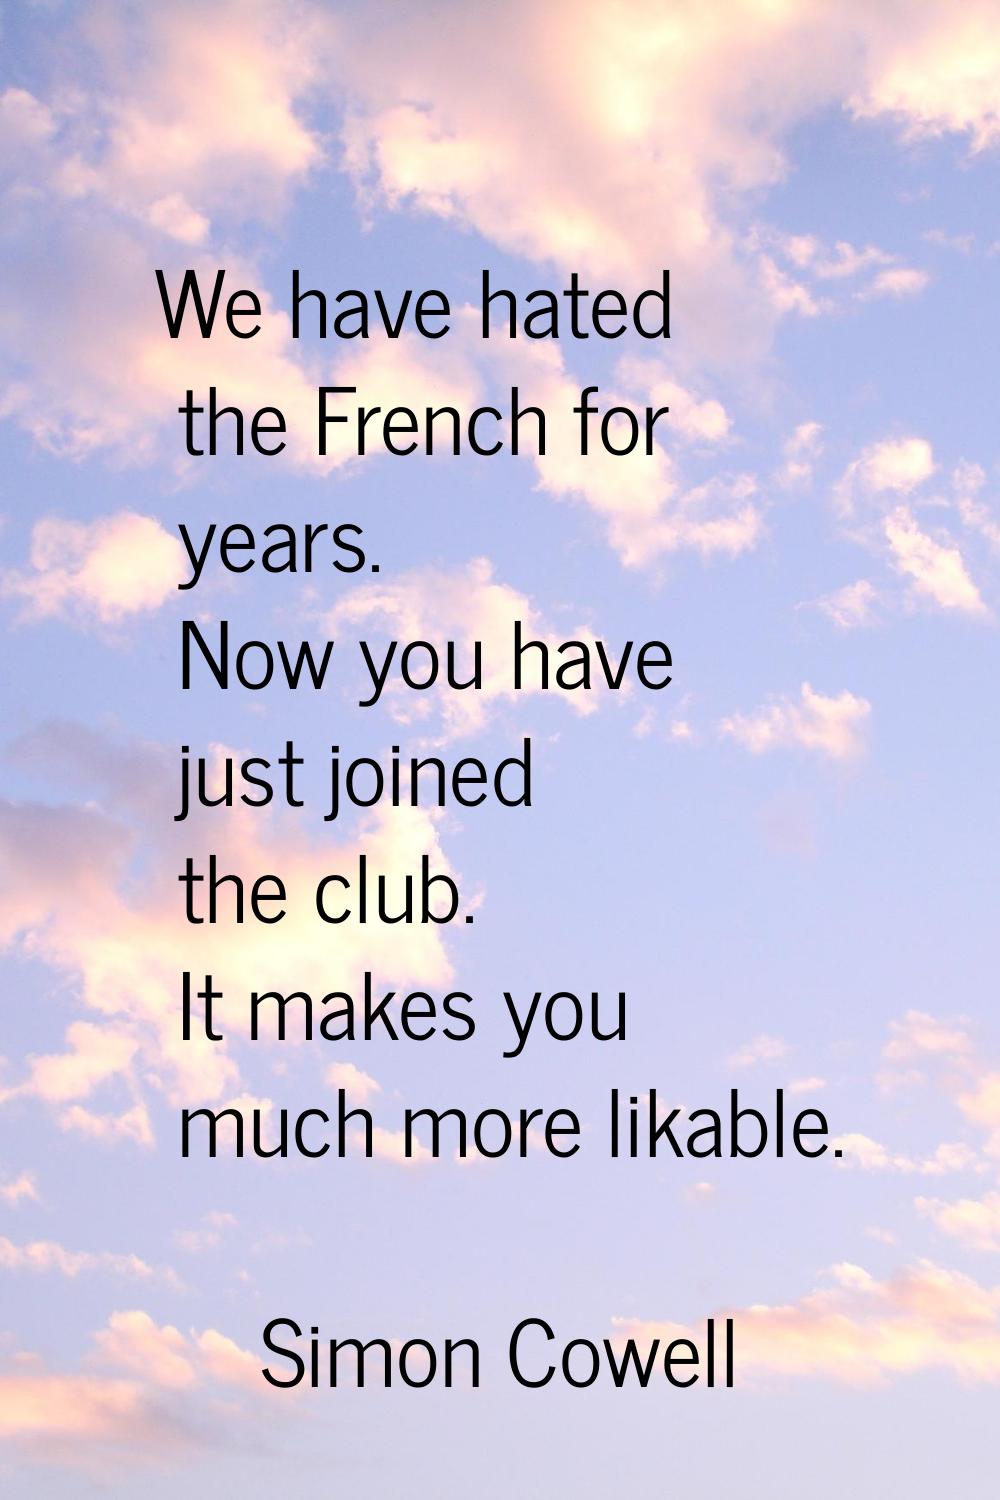 We have hated the French for years. Now you have just joined the club. It makes you much more likab